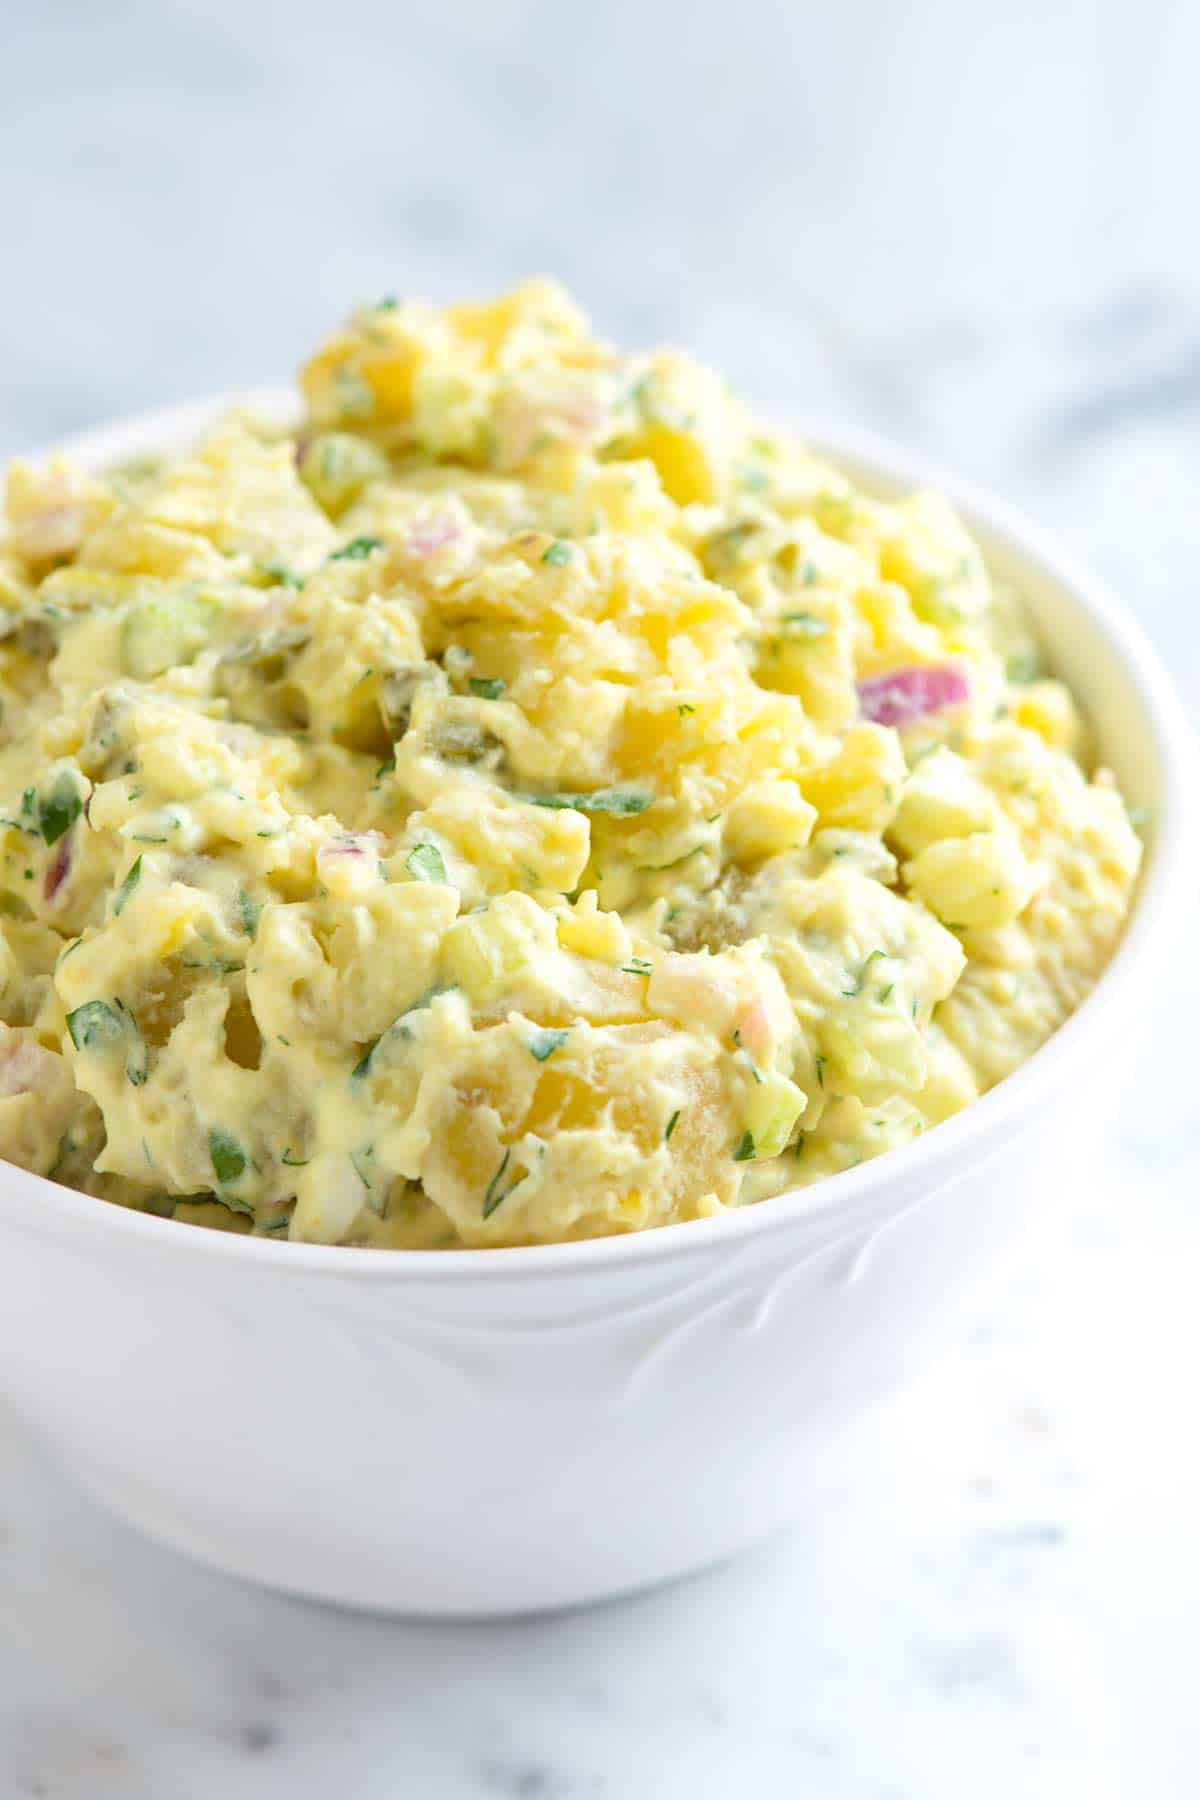 Bowl of our best potato salad with a creamy dressing